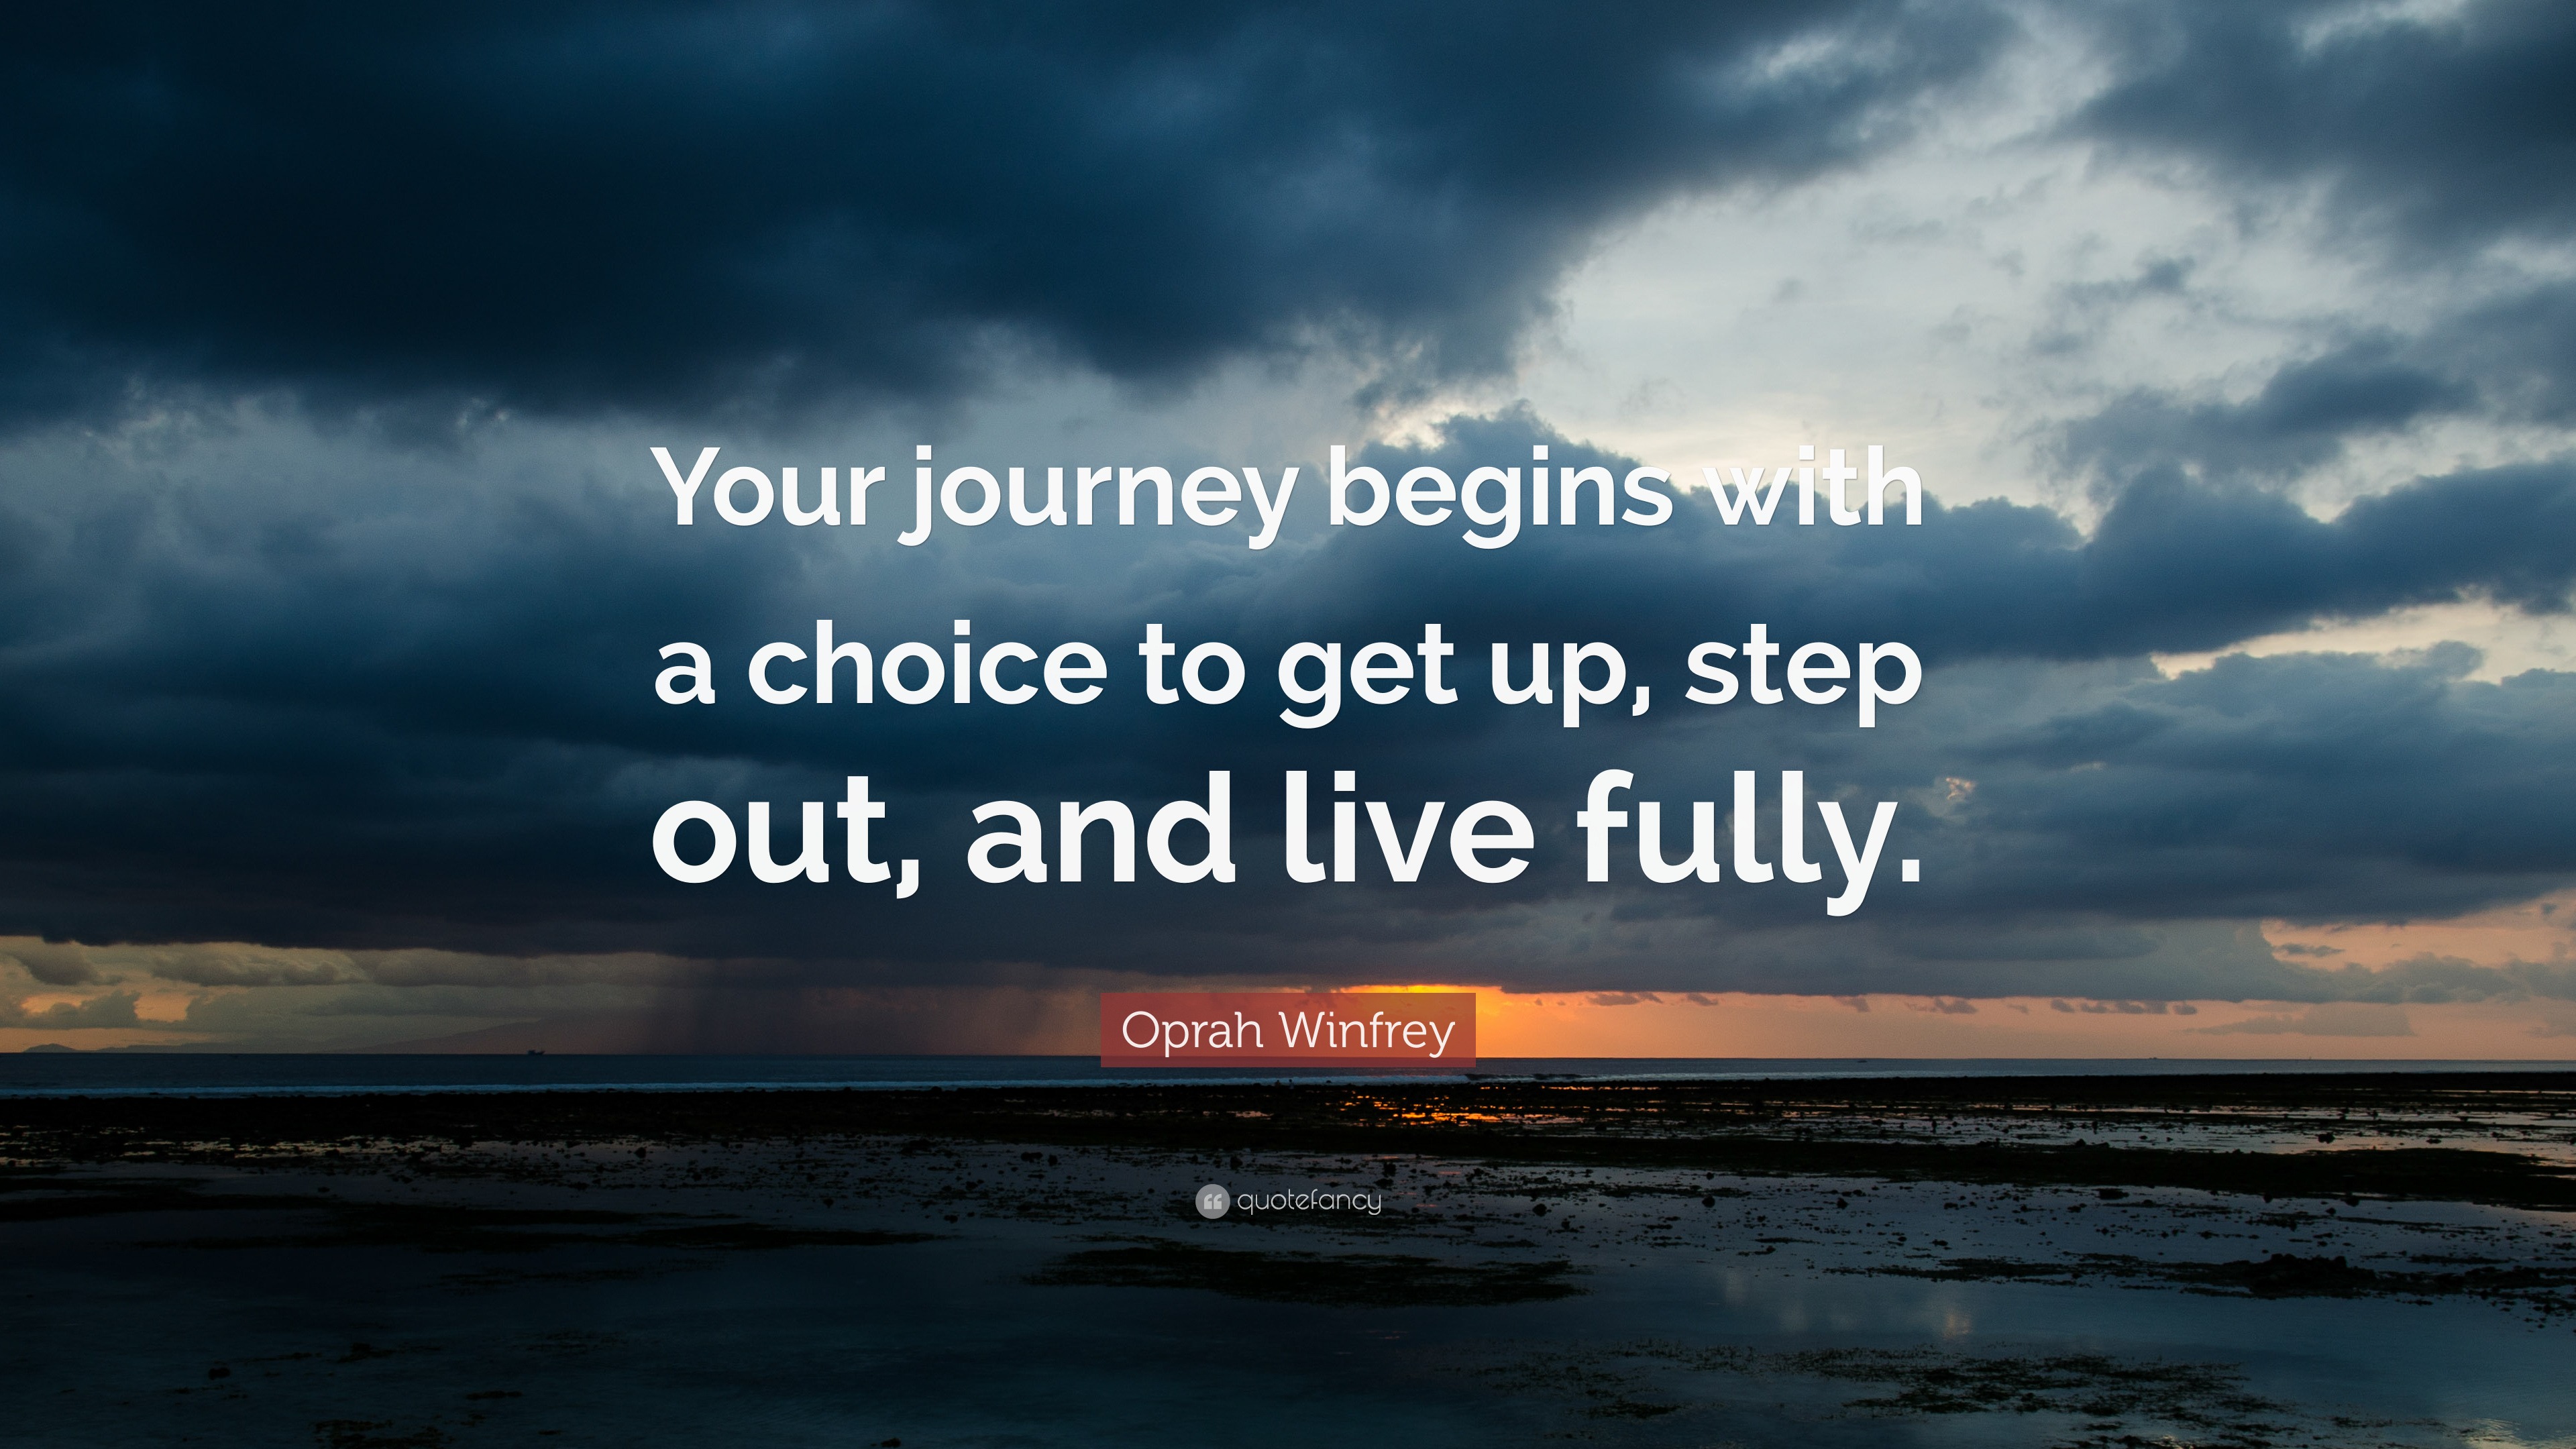 quotes on journey begins